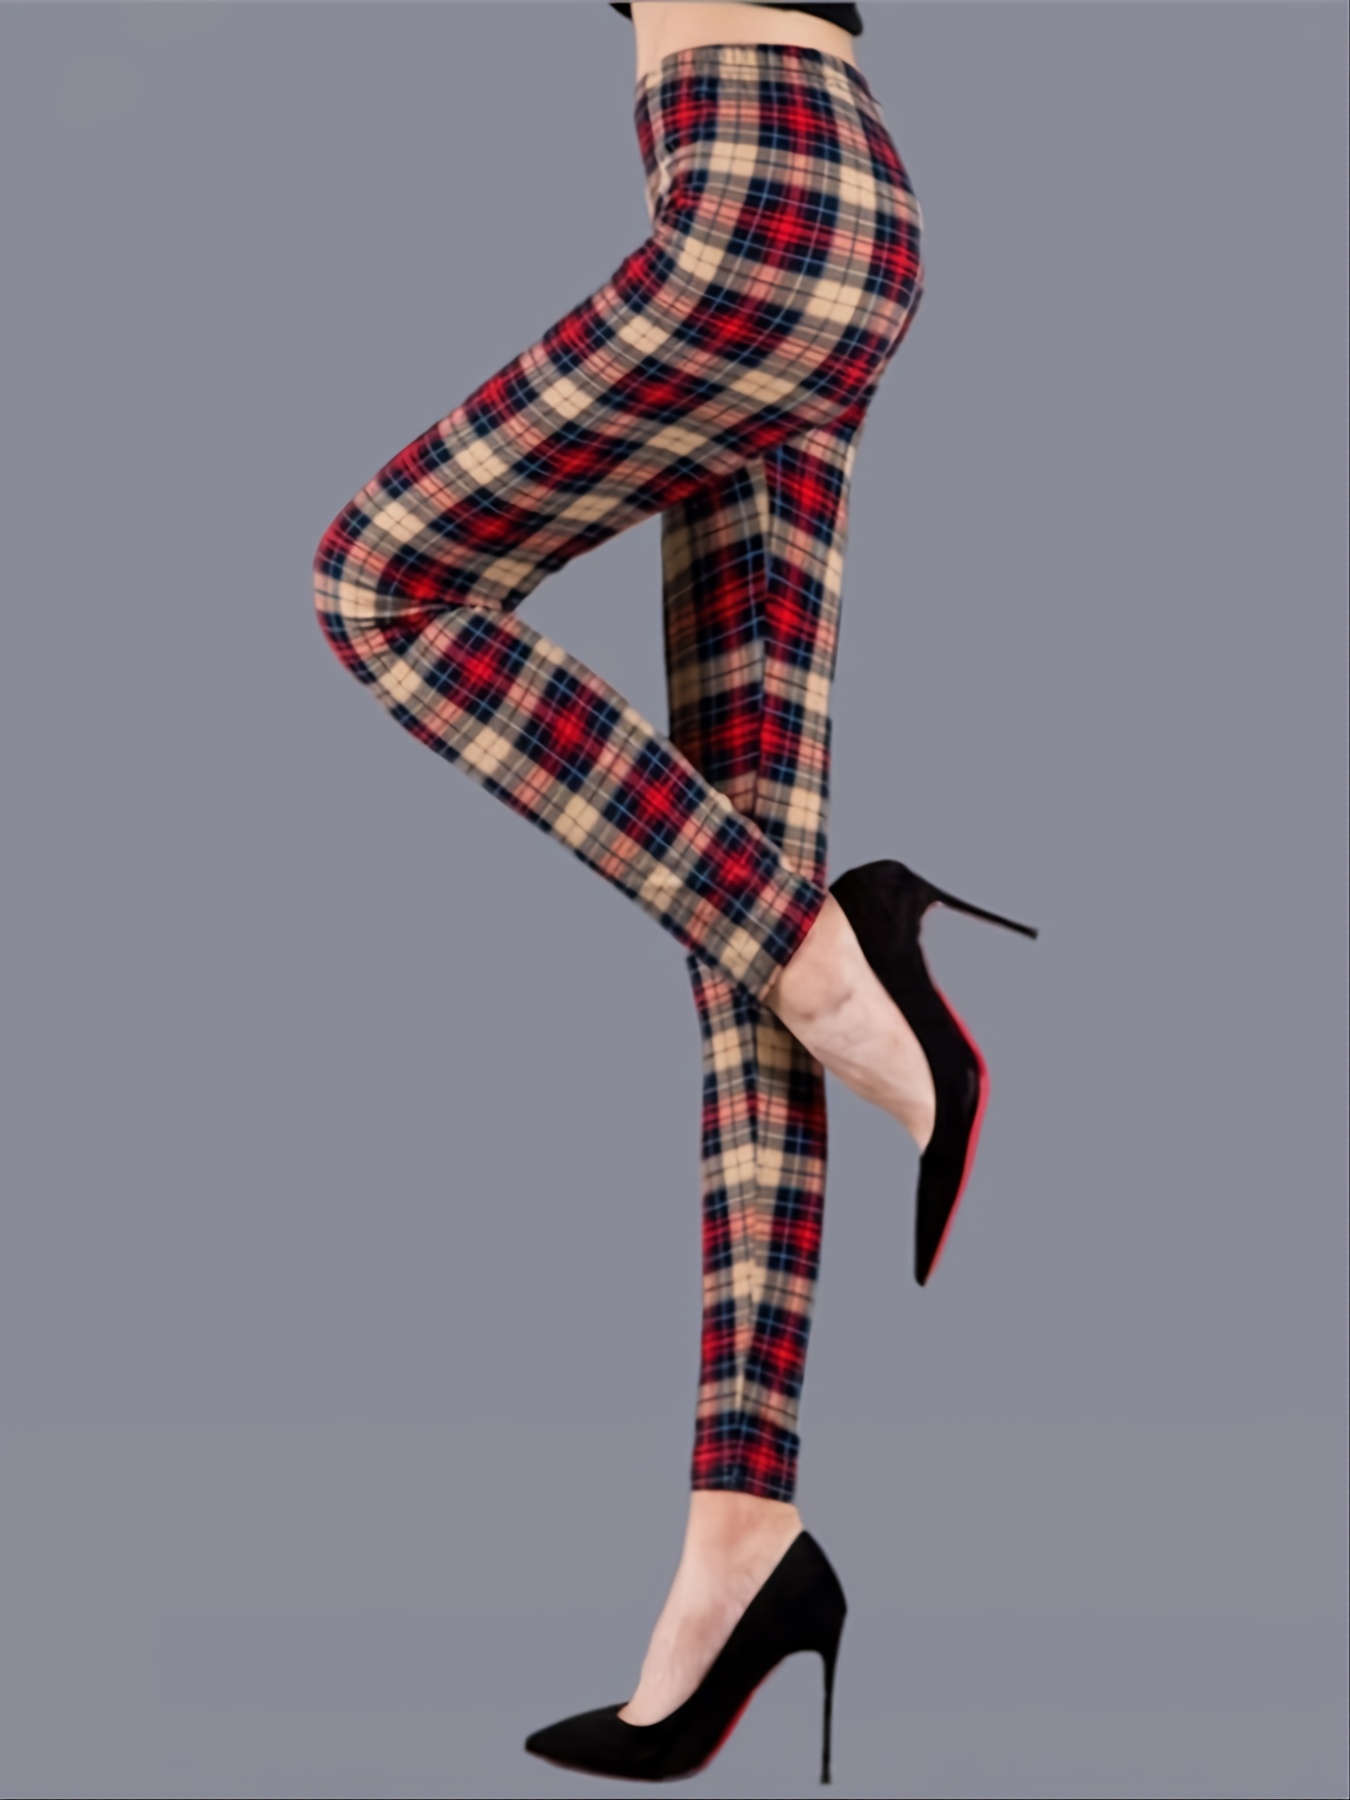  Women's Leggings - Reds / Women's Leggings / Women's Clothing:  Clothing, Shoes & Jewelry